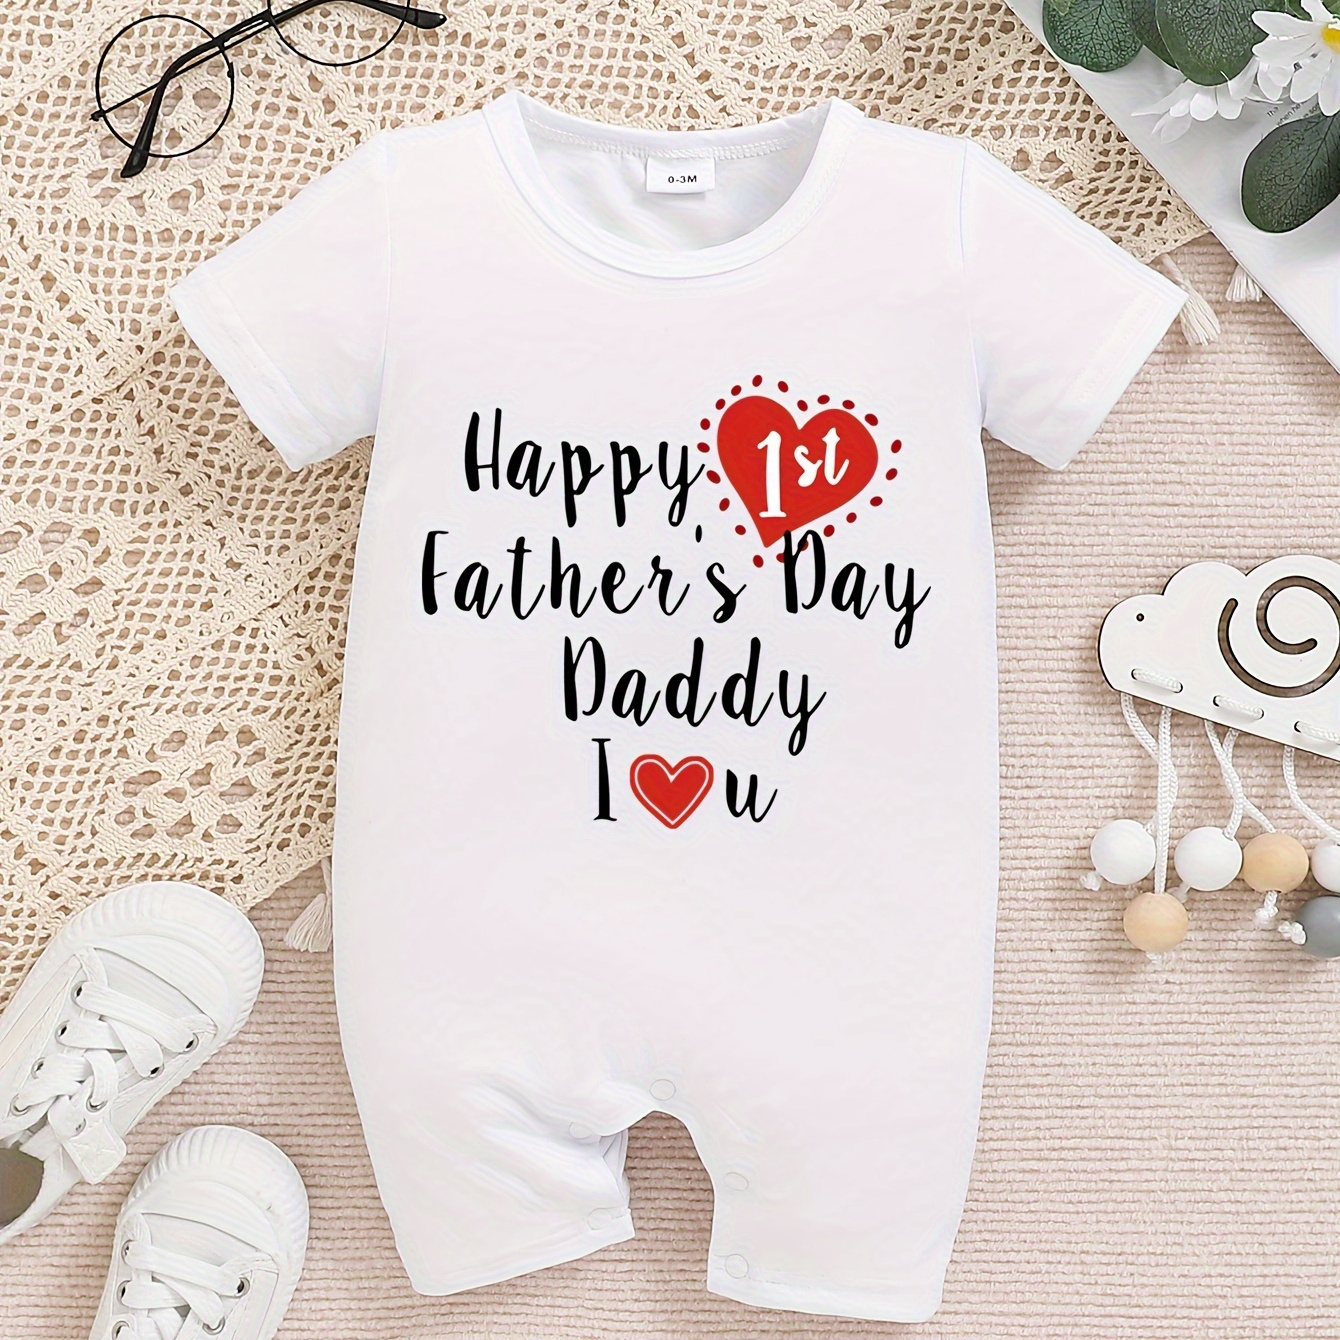 

Infant's "happy First Father's Day" Print Bodysuit, Casual Short Sleeve Romper, Baby Boy's Clothing